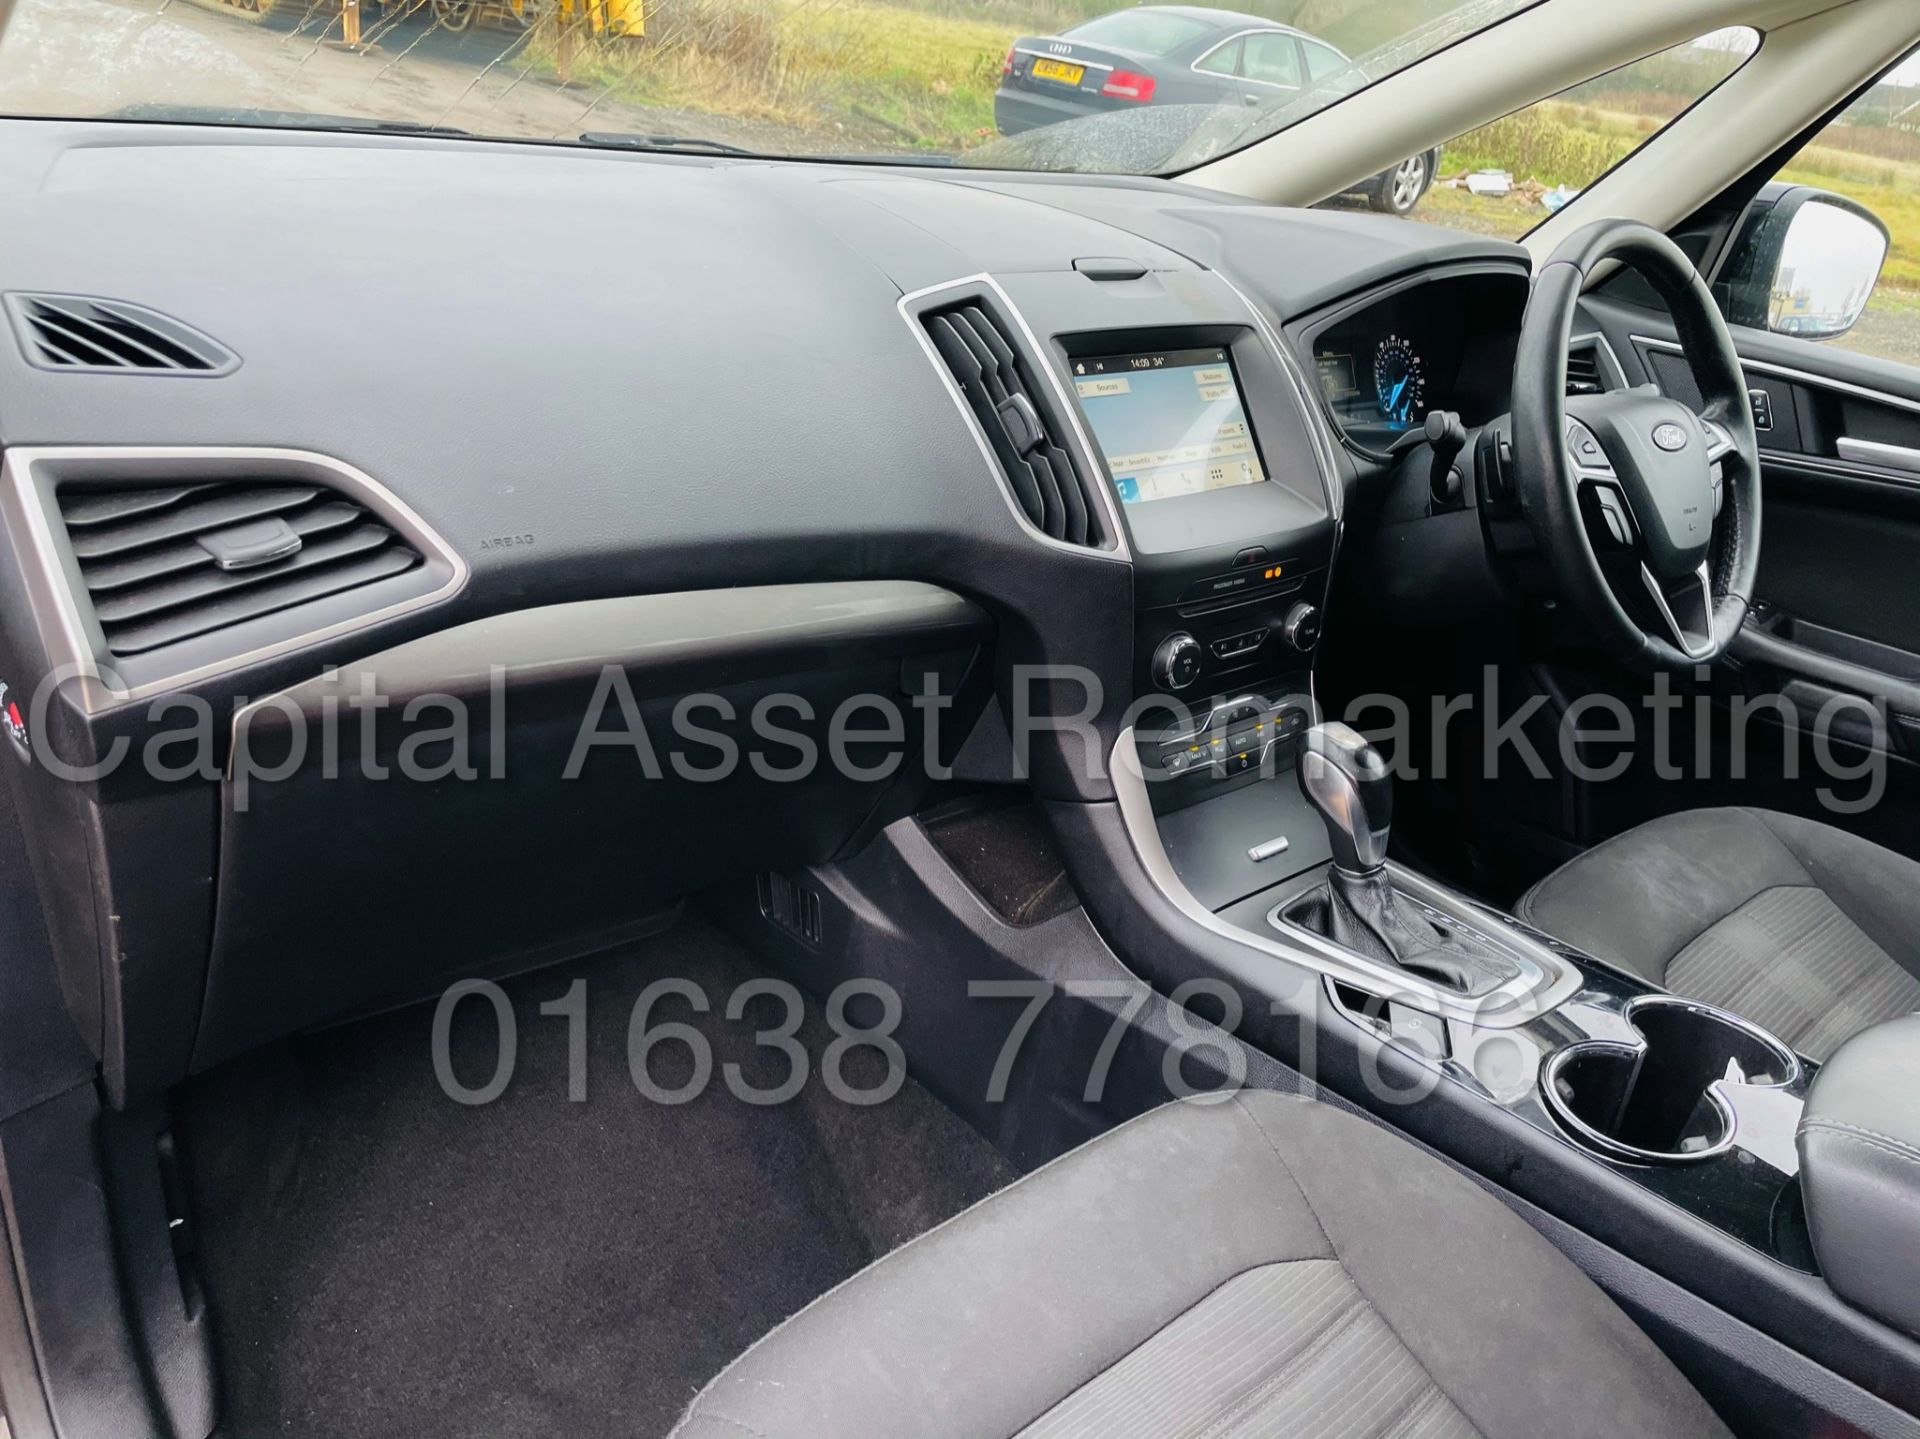 ON SALE FORD GALAXY *ZETEC EDITION* 7 SEATER MPV (2017 - EURO 6) '2.0 TDCI - AUTO' (- FULL HISTORY) - Image 19 of 48